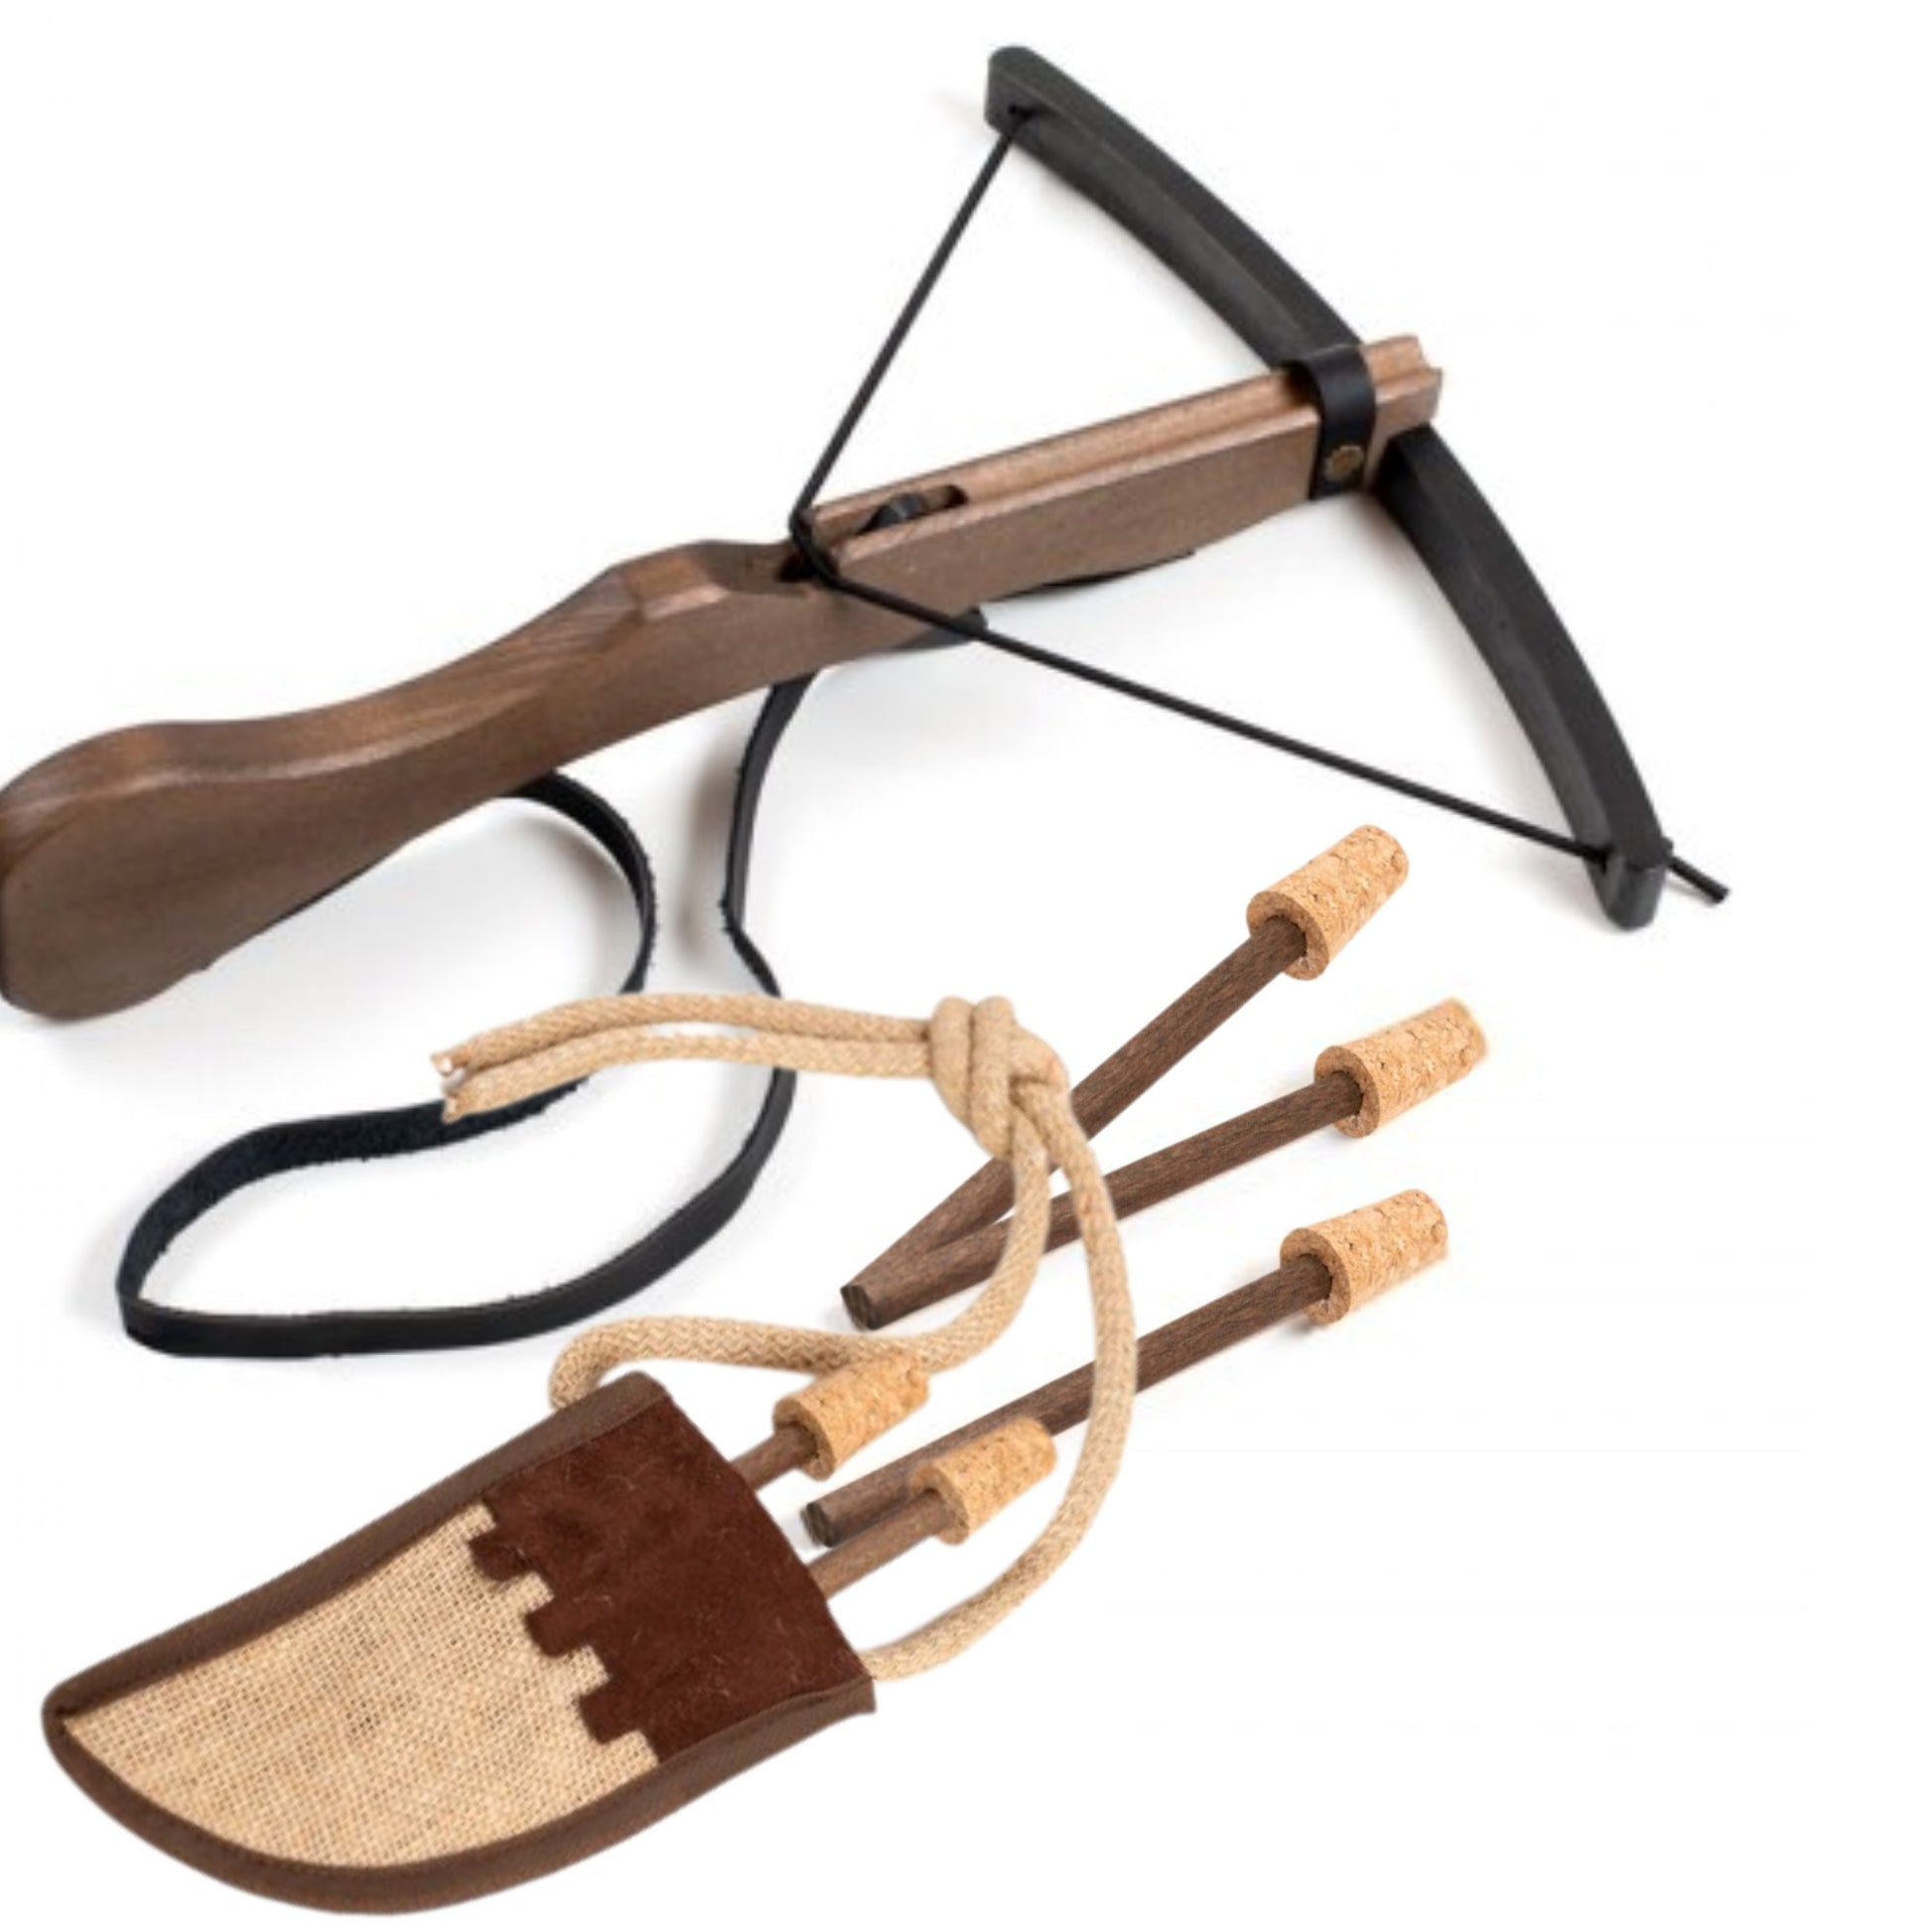 Kalid Medieval Toy Crossbow with Quiver & 5 Cork Arrows Medieval Crossbow - Alder & Alouette